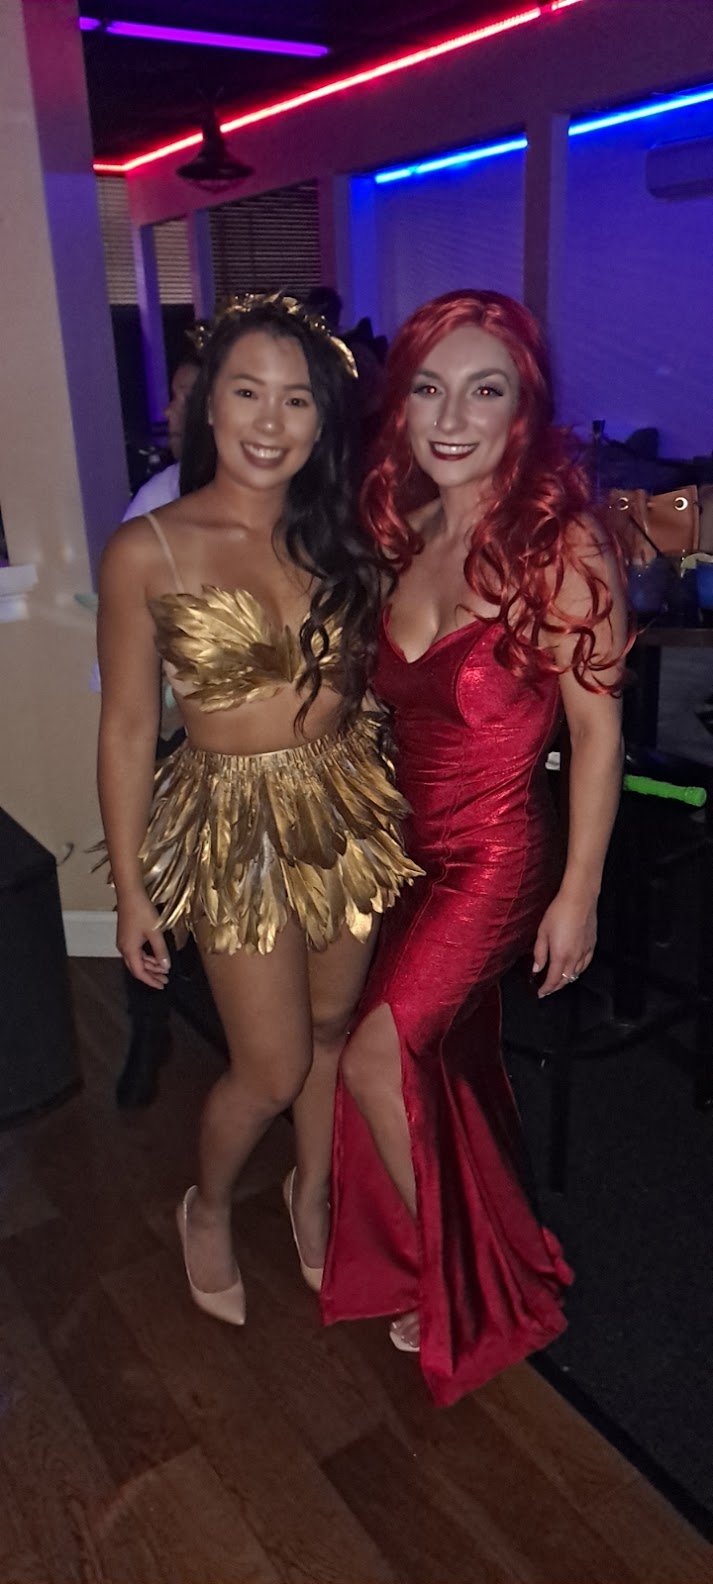 Two women in red and gold costumes posing for a photo.